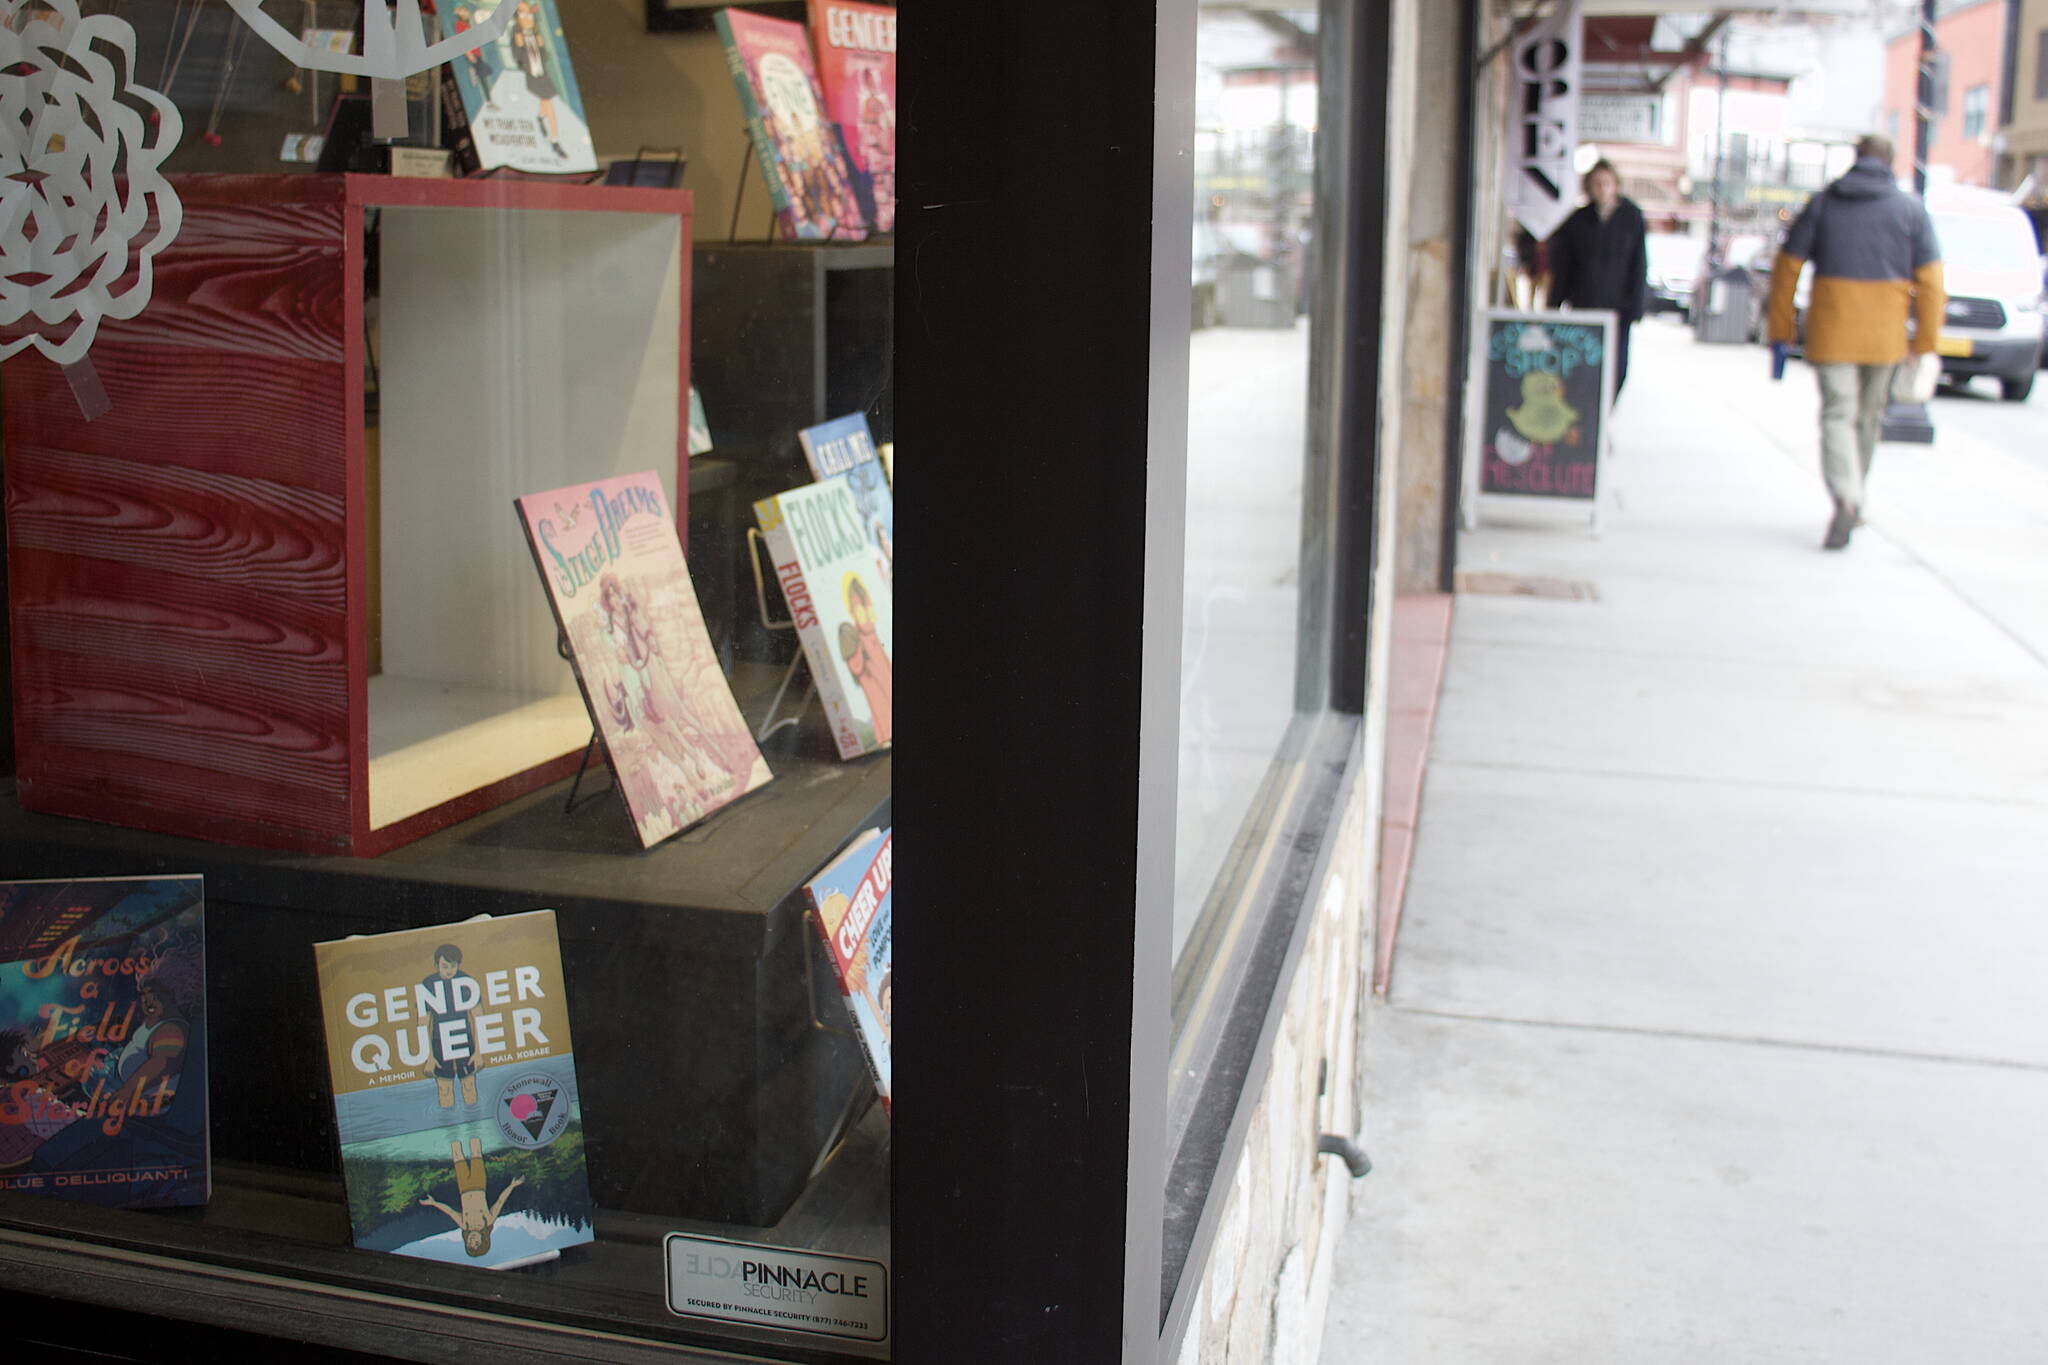 A collection of books including LGBTQ-friendly titles are displayed in the storefront window of Alaska Robotics in downtown Juneau on Tuesday. The store, which featured books and cards illustrated by local artist Mitchell Watley, removed them following his arrest Sunday for allegedly placing transphobic notes threatening violence against children at locations around town. (Mark Sabbatini / Juneau Empire)